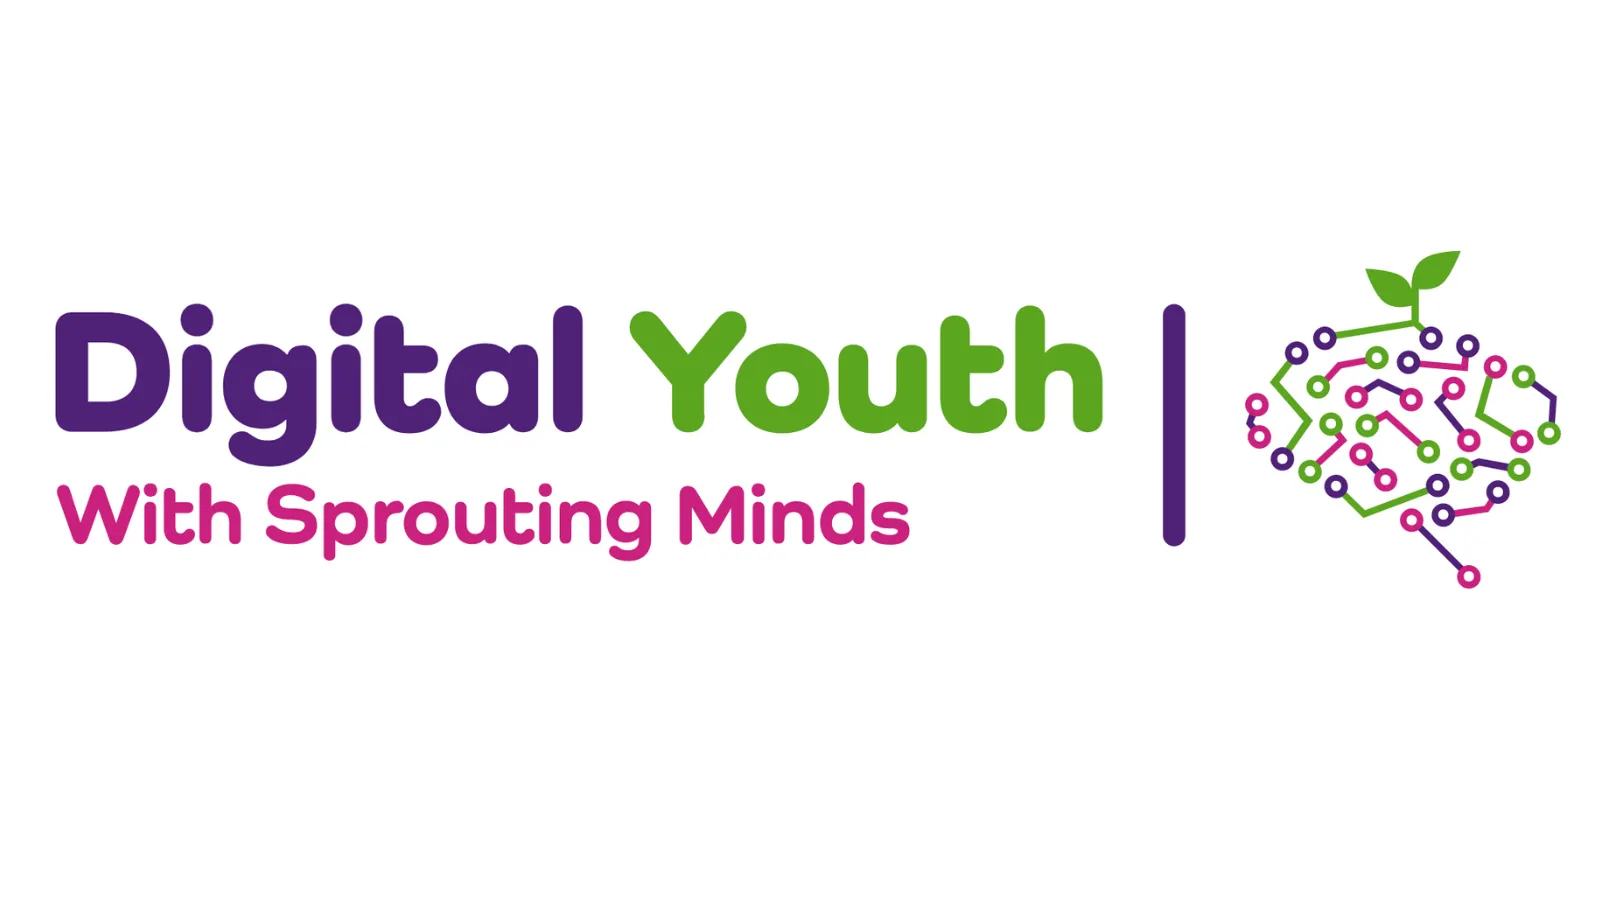 Digital Youth with Sprouting Minds